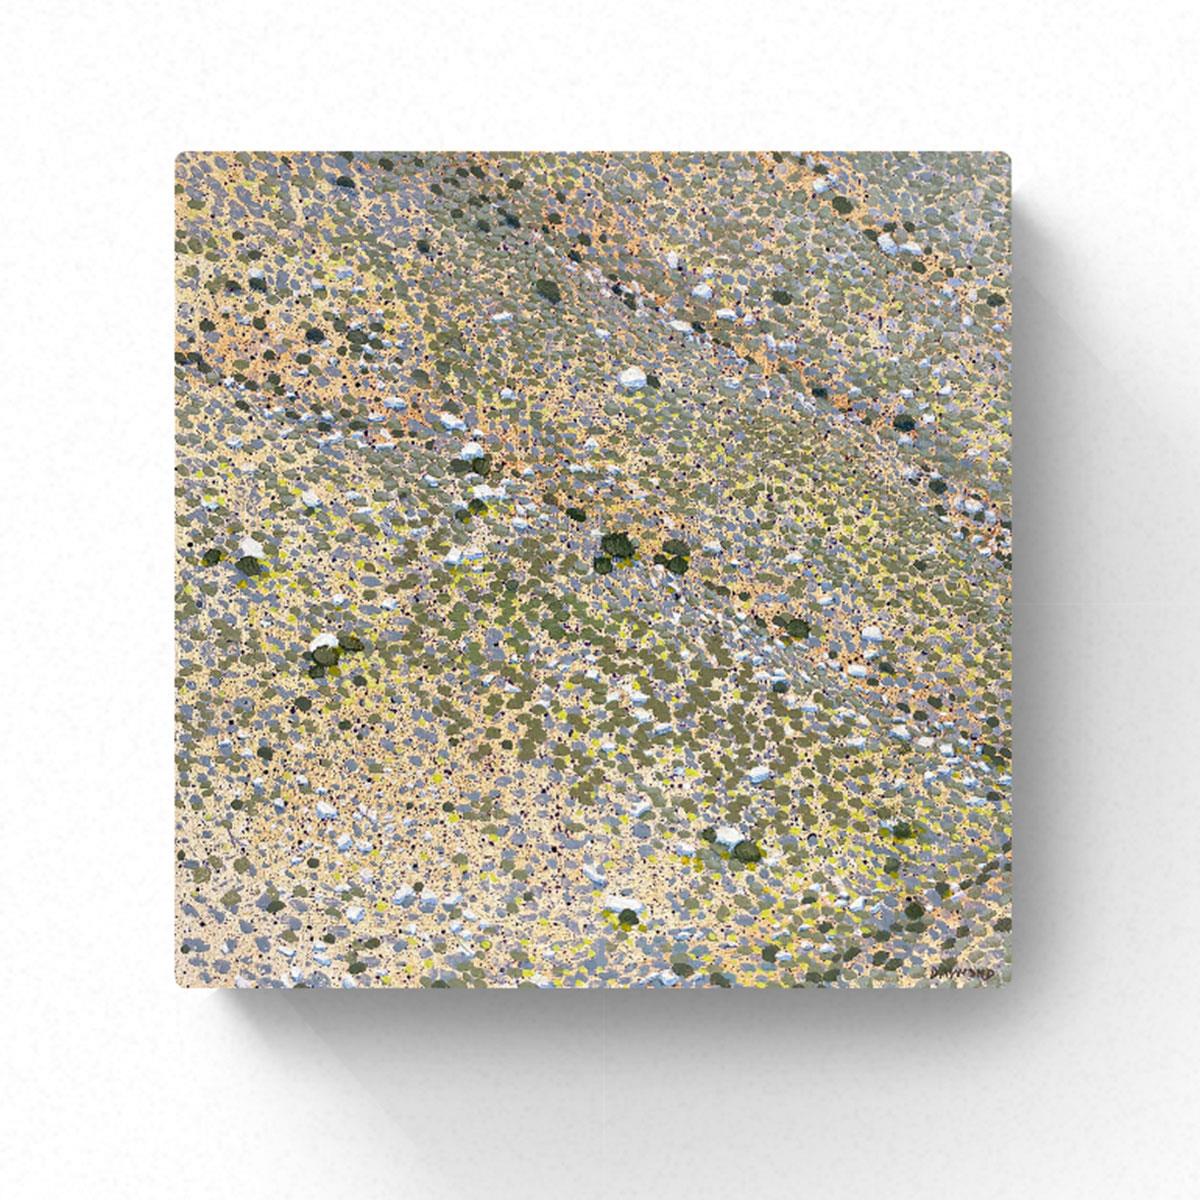 picture of the detail of the Karoo landscape from above